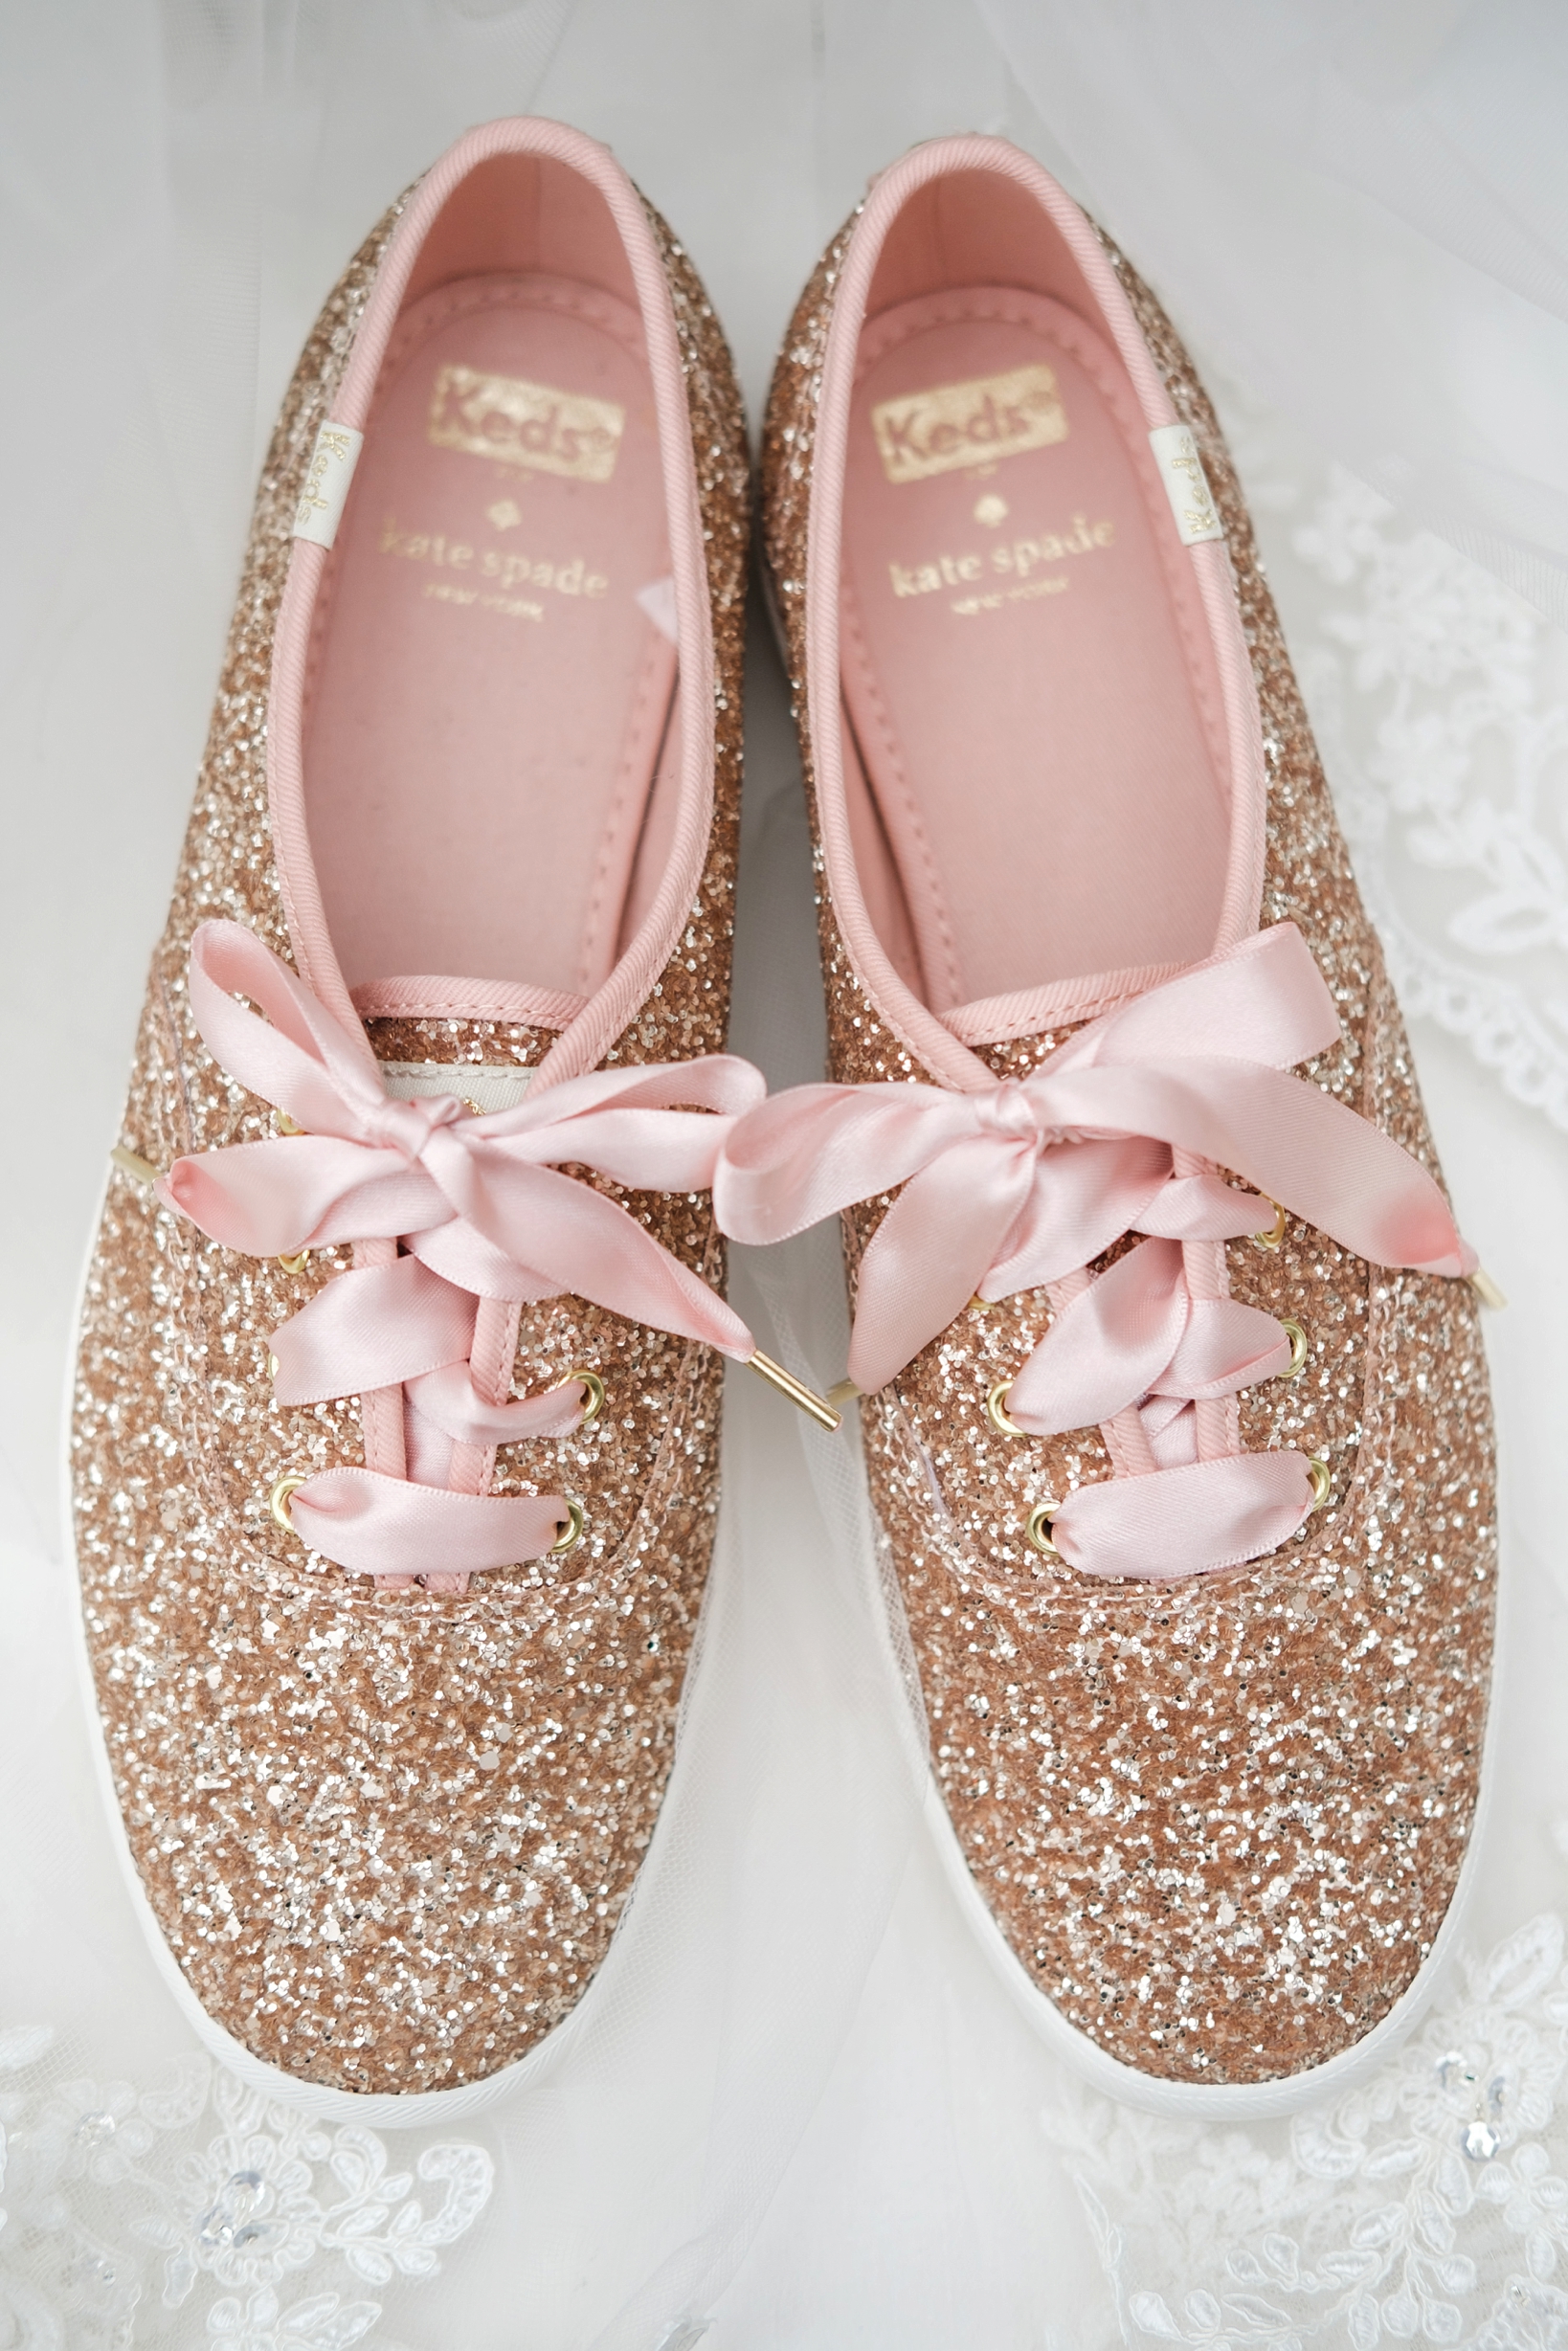 Rose gold Kate Spade sneakers made for dancing during the Bride and Grooms cross creek wedding celebration